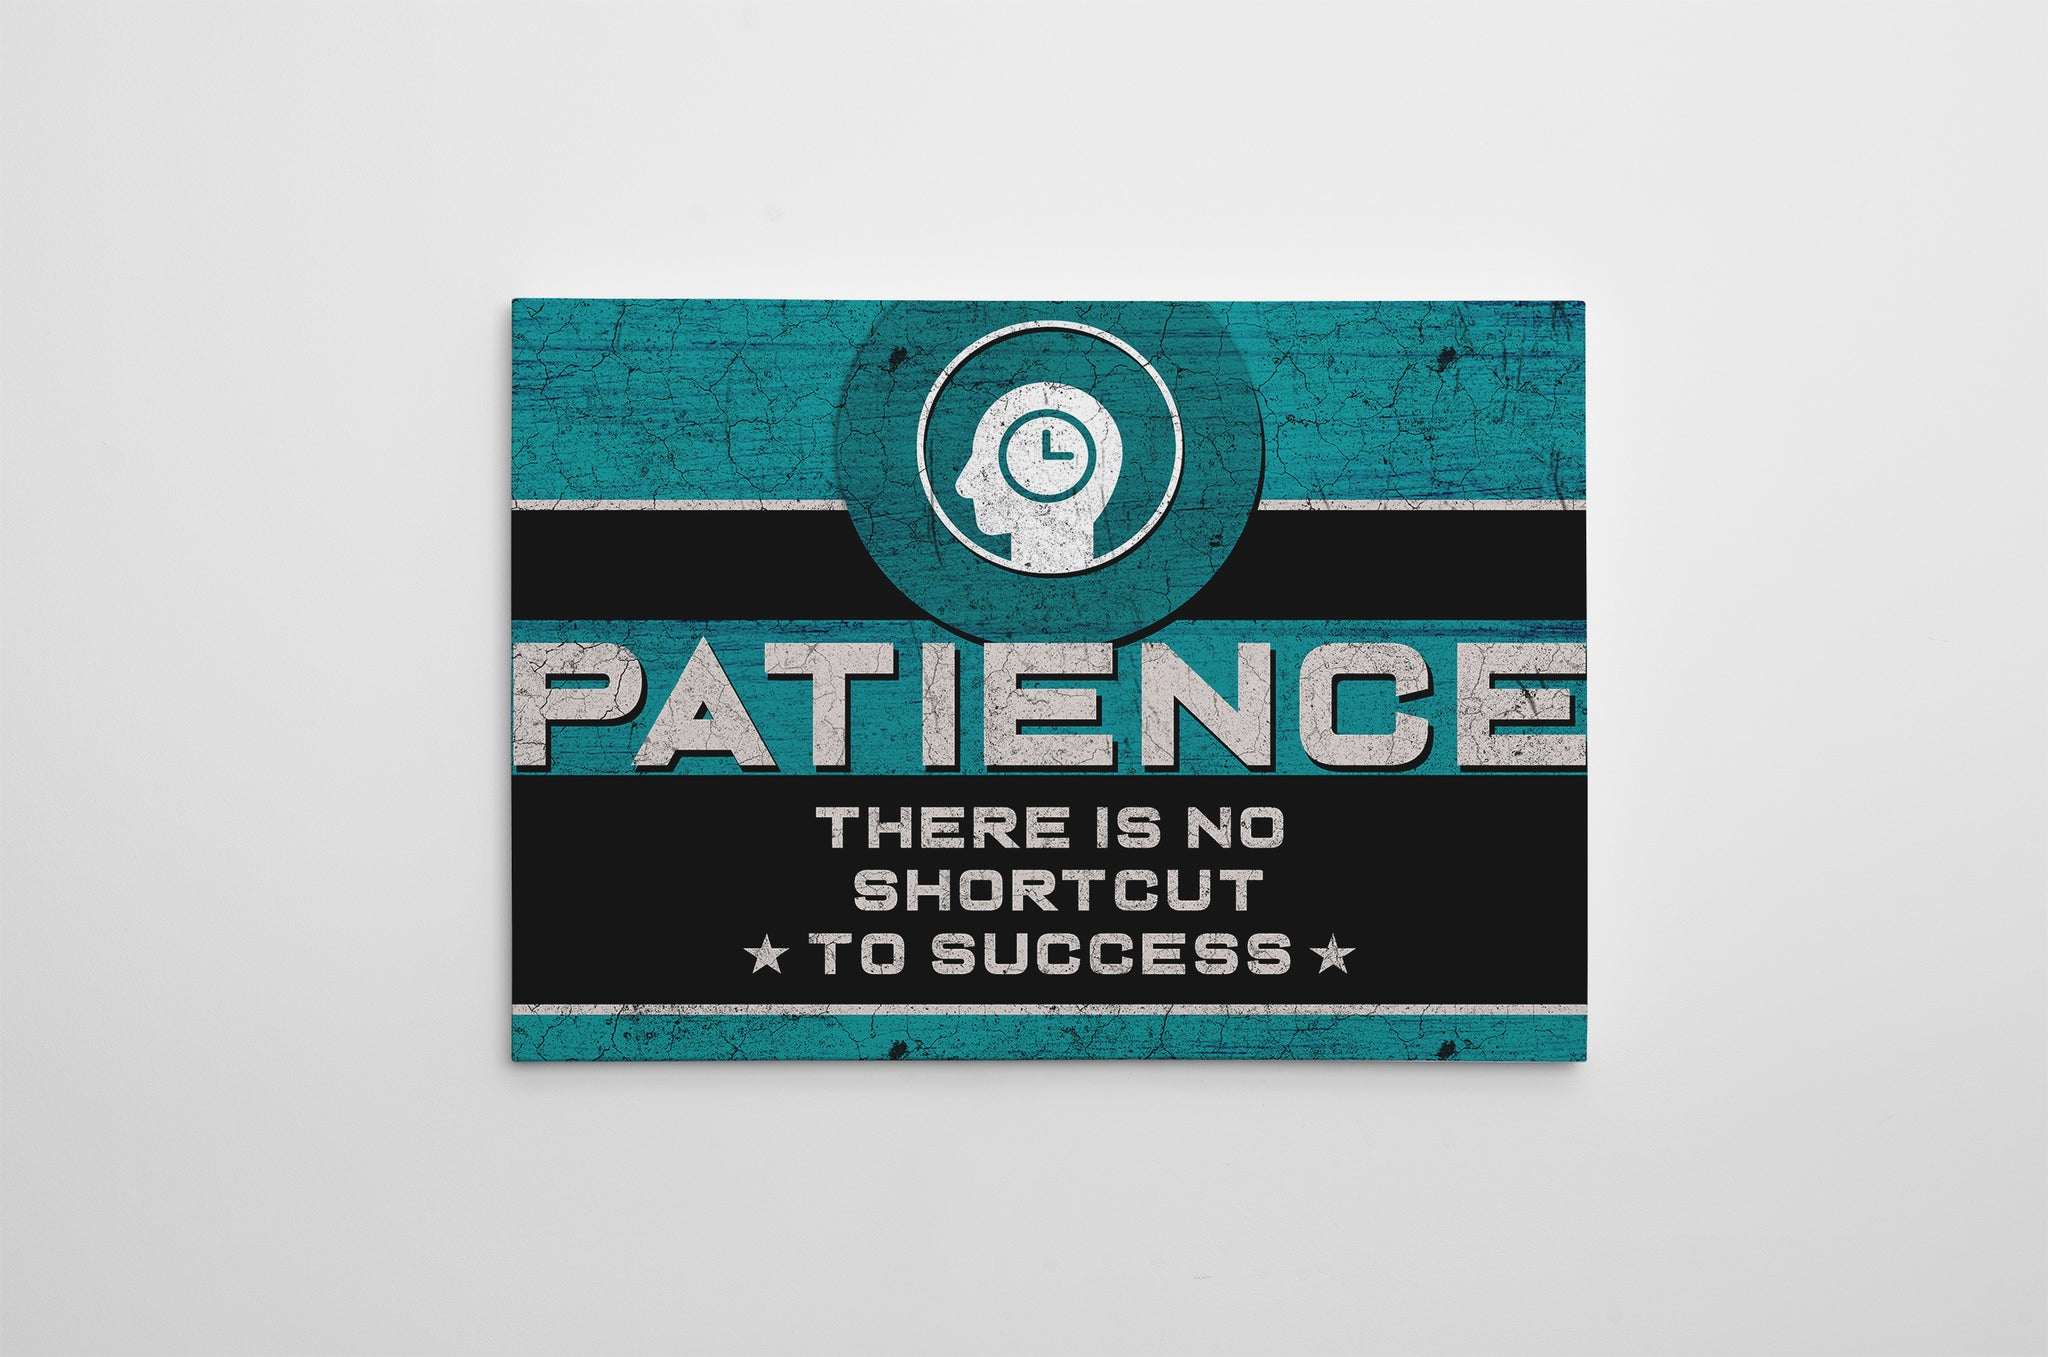 Patience Canvas Wall Art